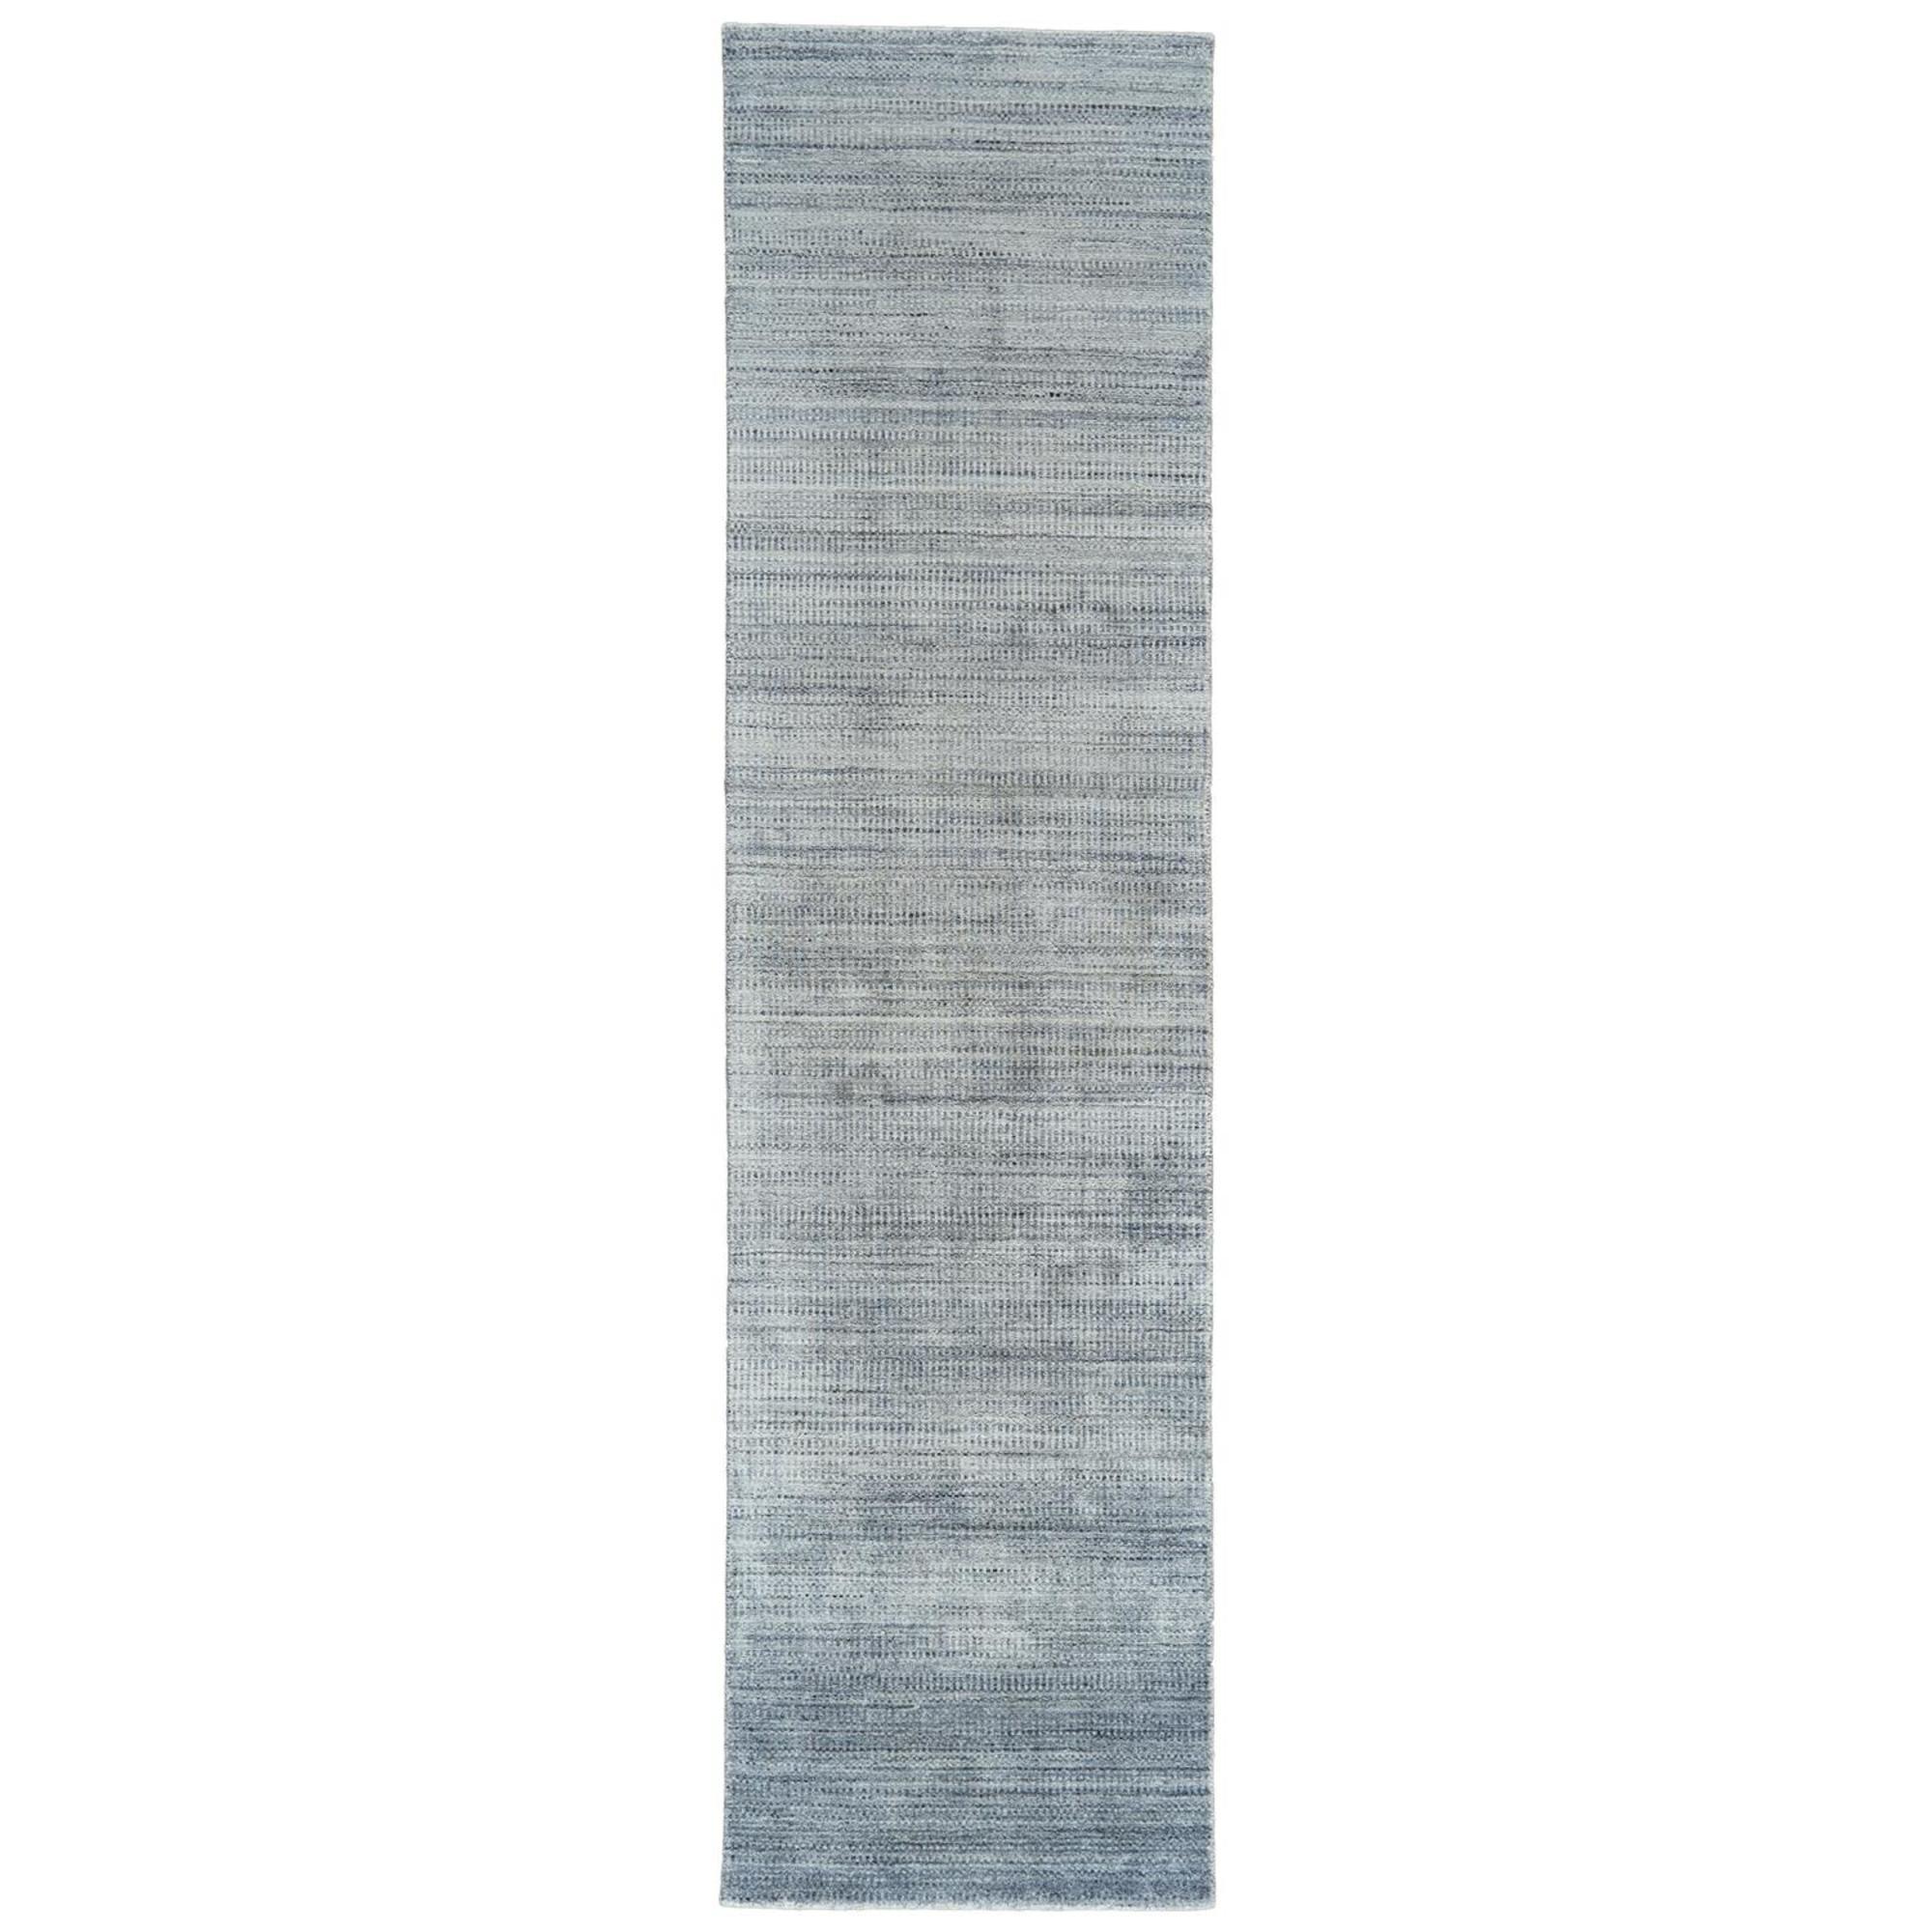 10' Blue and Gray Ombre Hand Woven Runner Rug-511733-1